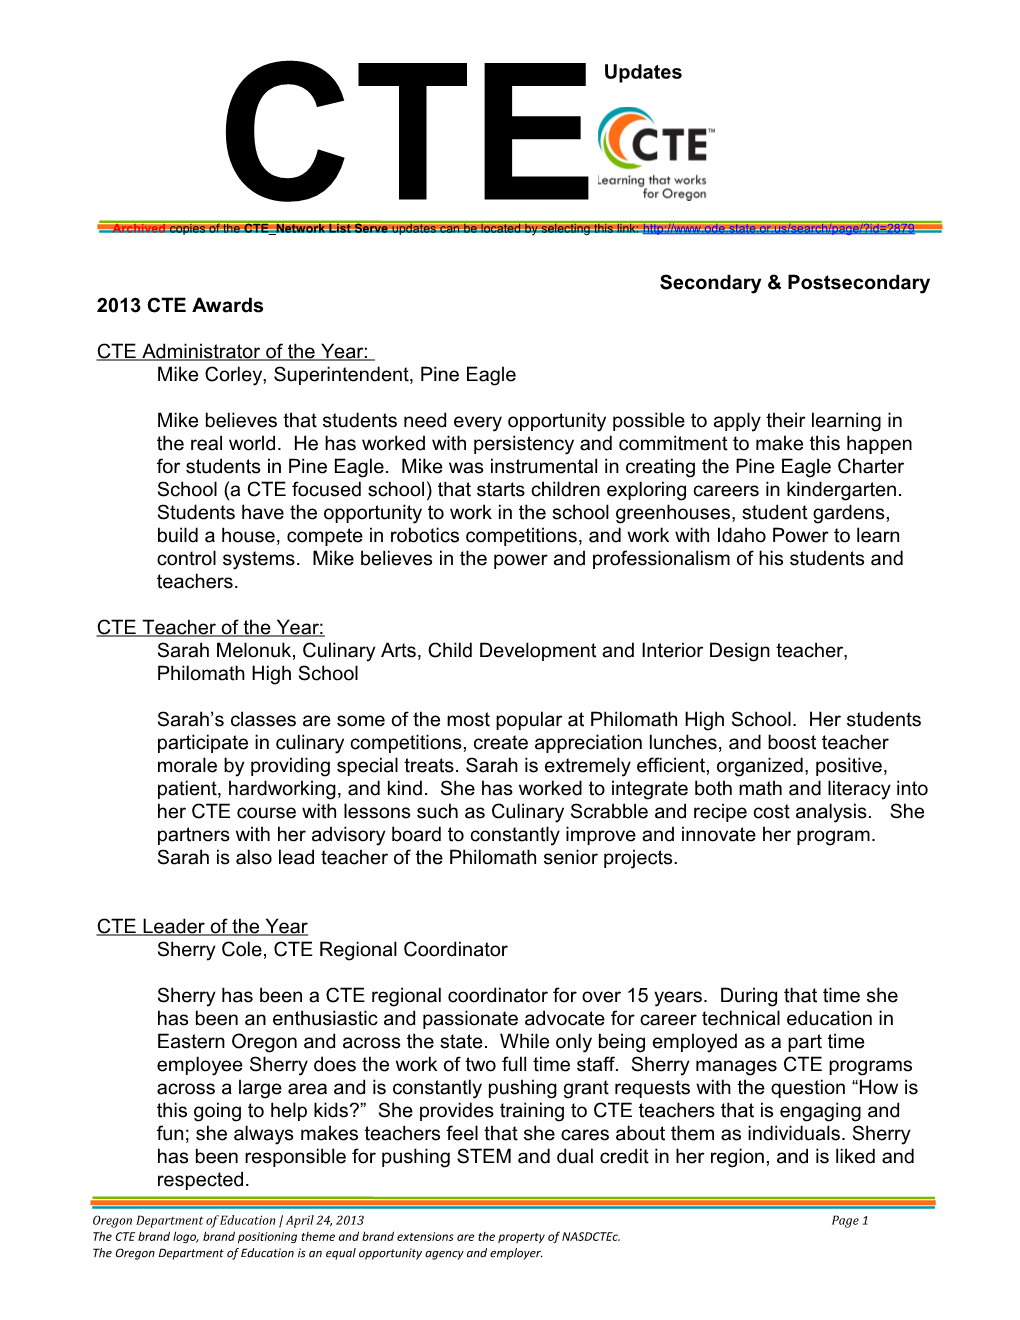 Archived Copies of the CTE Network List Serve Updates Can Be Located by Selecting This Link